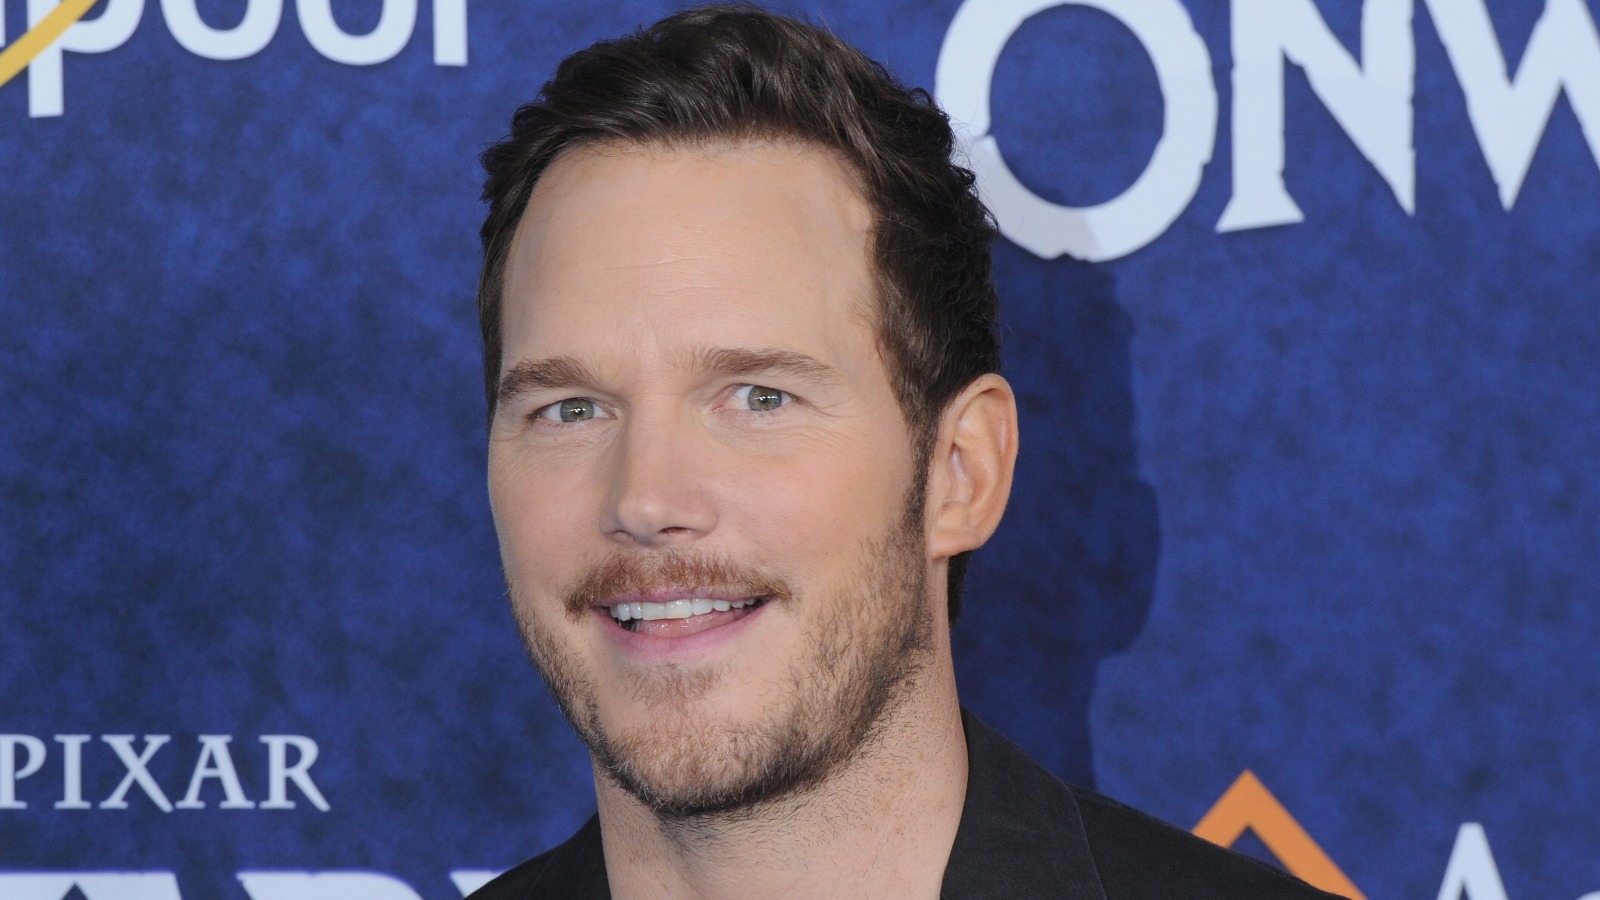 why People Are Calling For Chris Pratt To Be Canceled